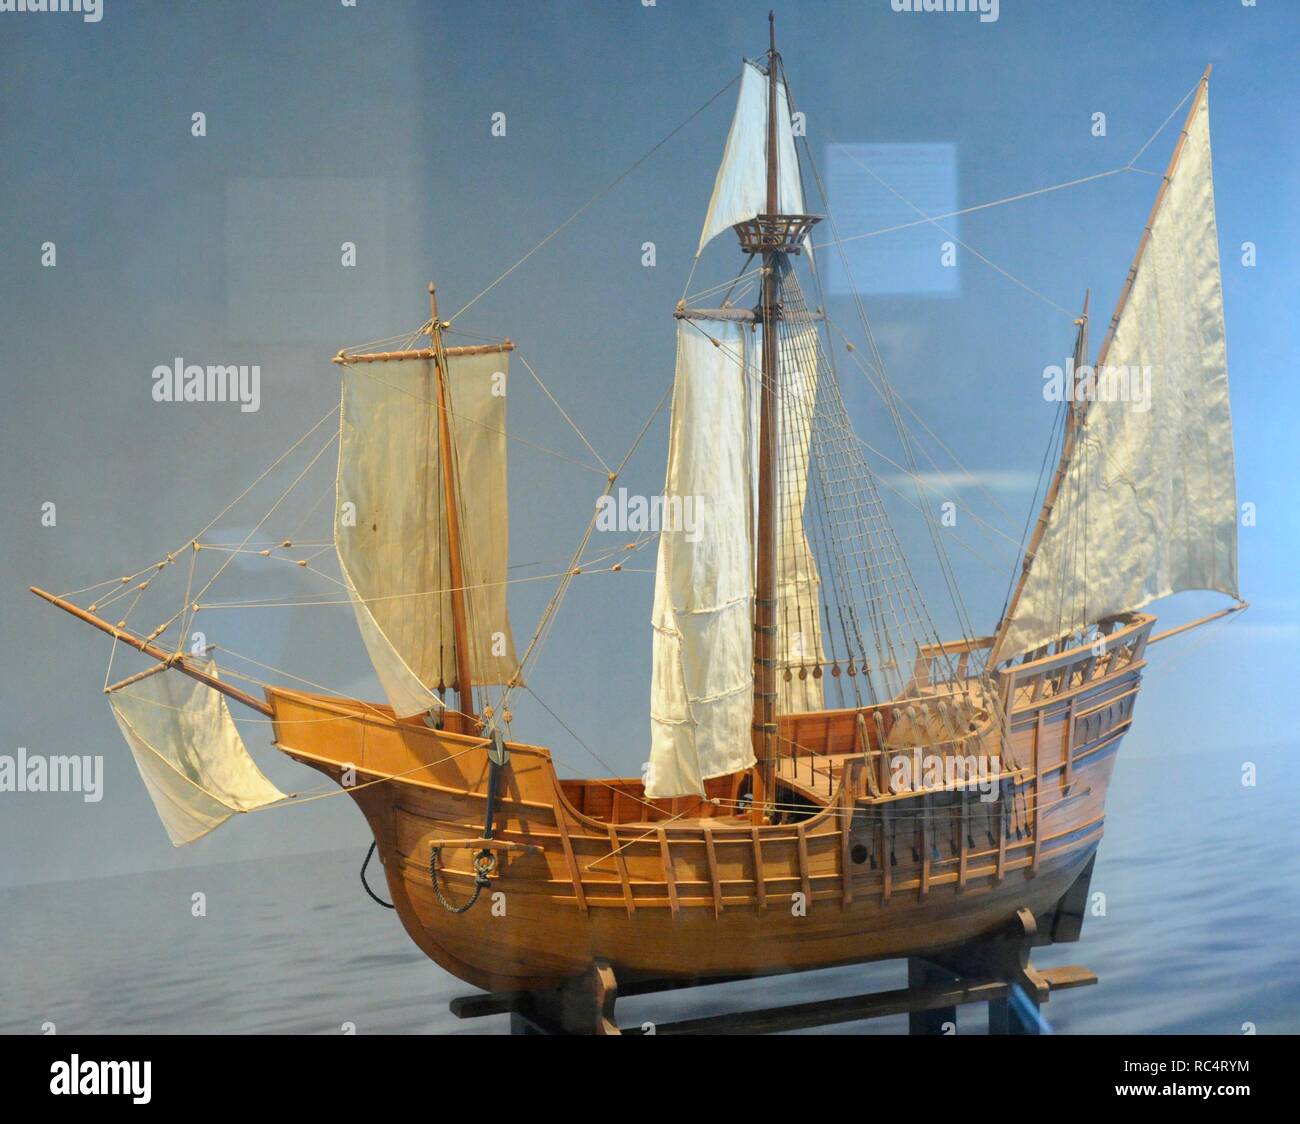 Age of Discovery. Caravel ship. Used by oceanic exploration voyages during the 15th and 16th centuries. Model. Norwegian Maritime Museum. Oslo. Norway. Stock Photo